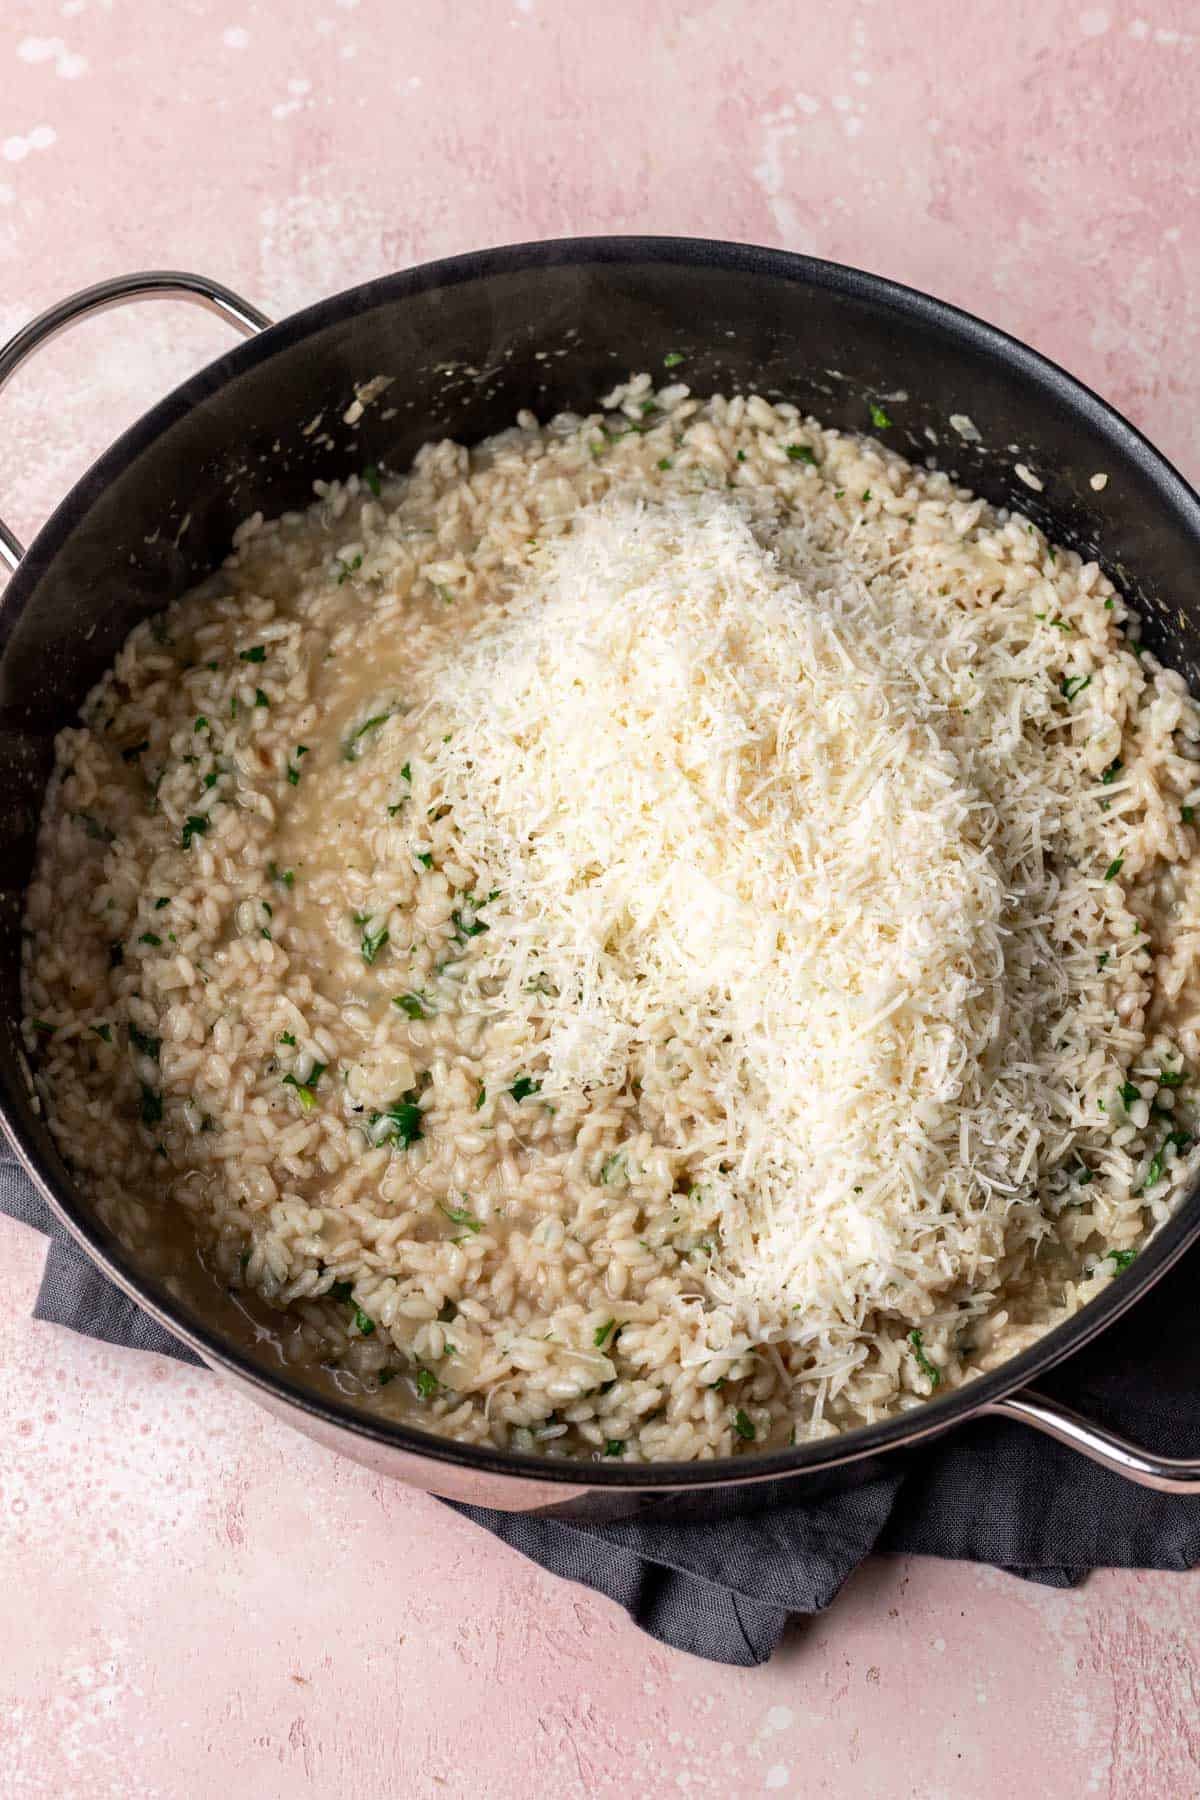 Cooked risotto topped with parmesan cheese before stirring.